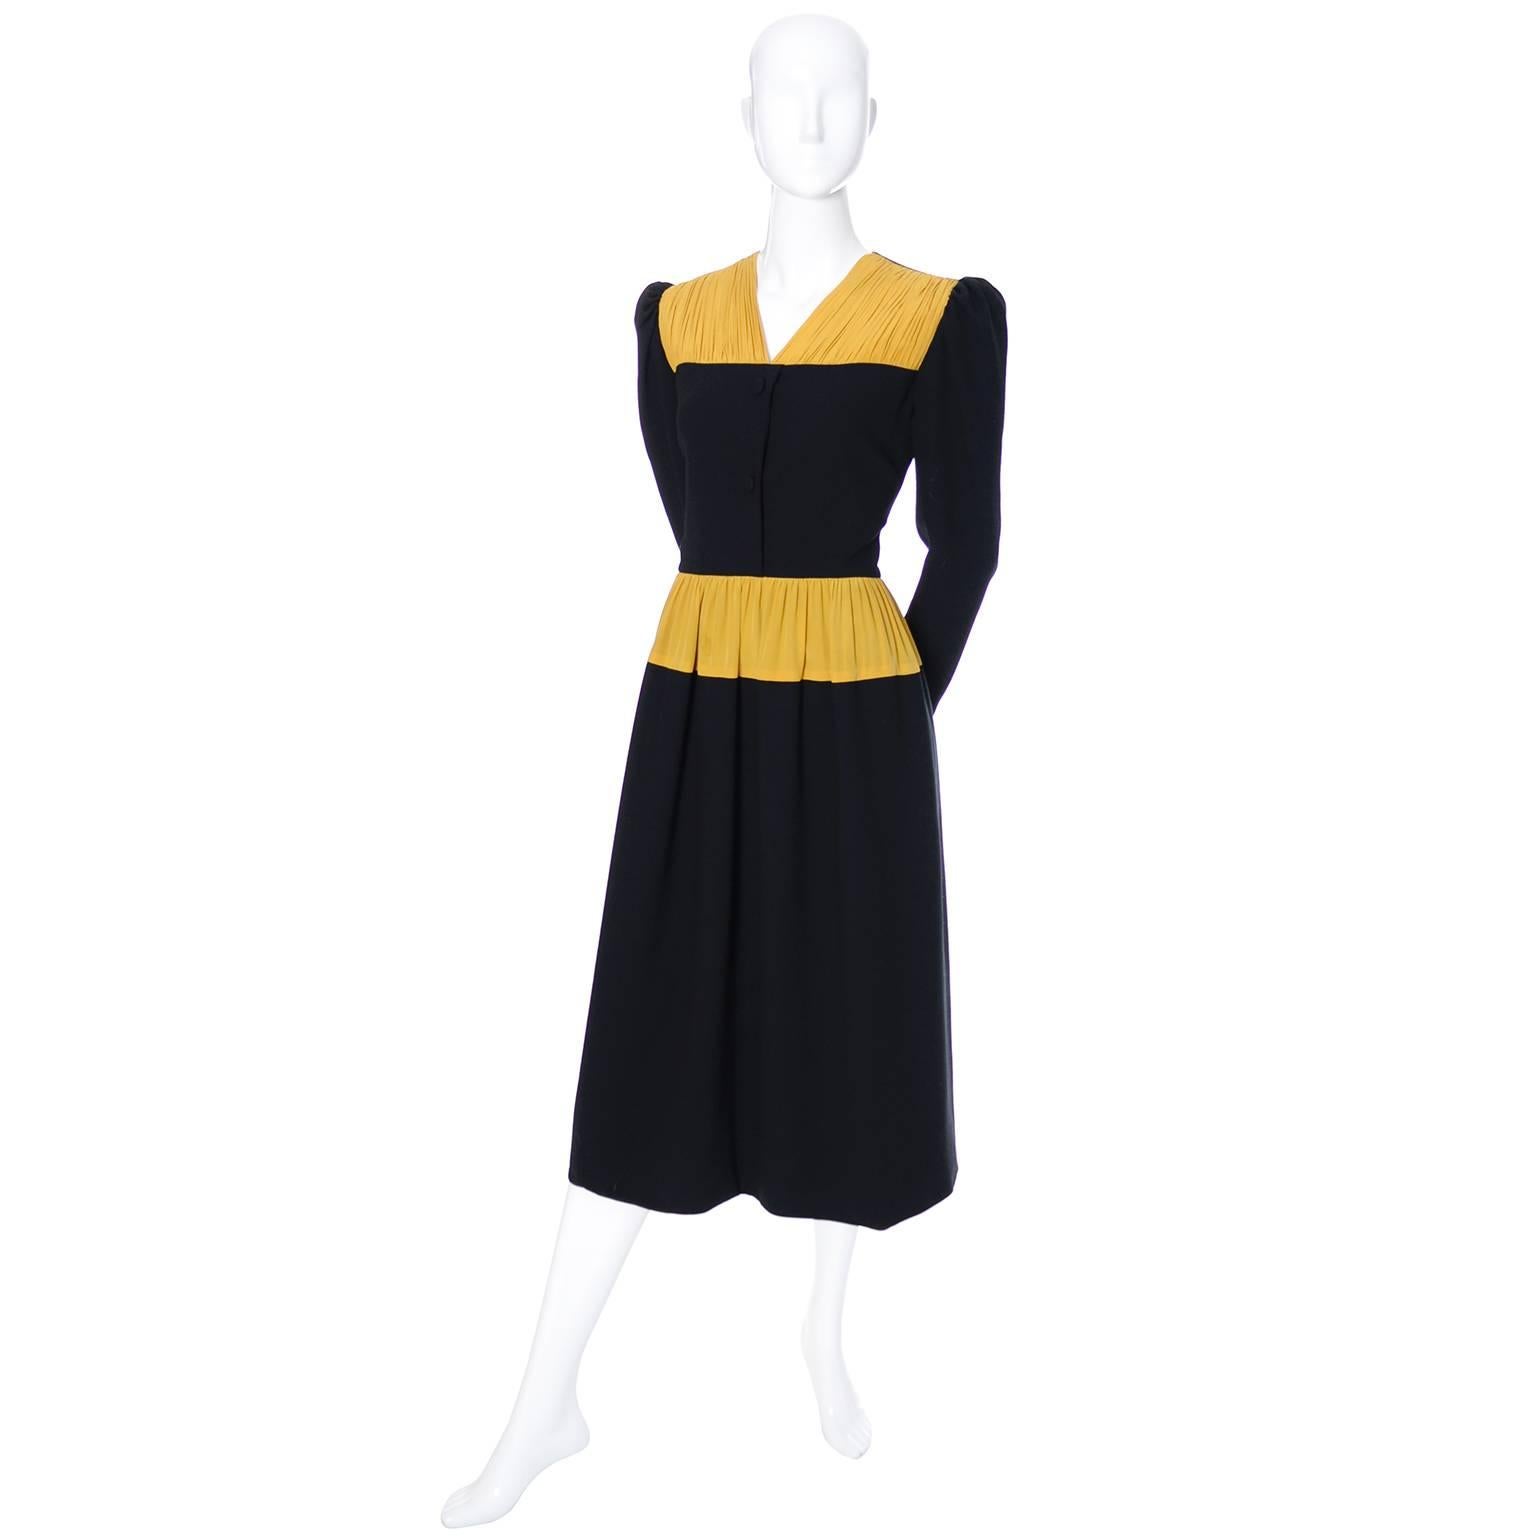 This is a really lovely vintage dress from Carolina Herrera in black wool crepe with gorgeous marigold yellow pleated silk at the neckline and the waist. This dress zips up the back center seam and has decorative buttons on the bodice. There are